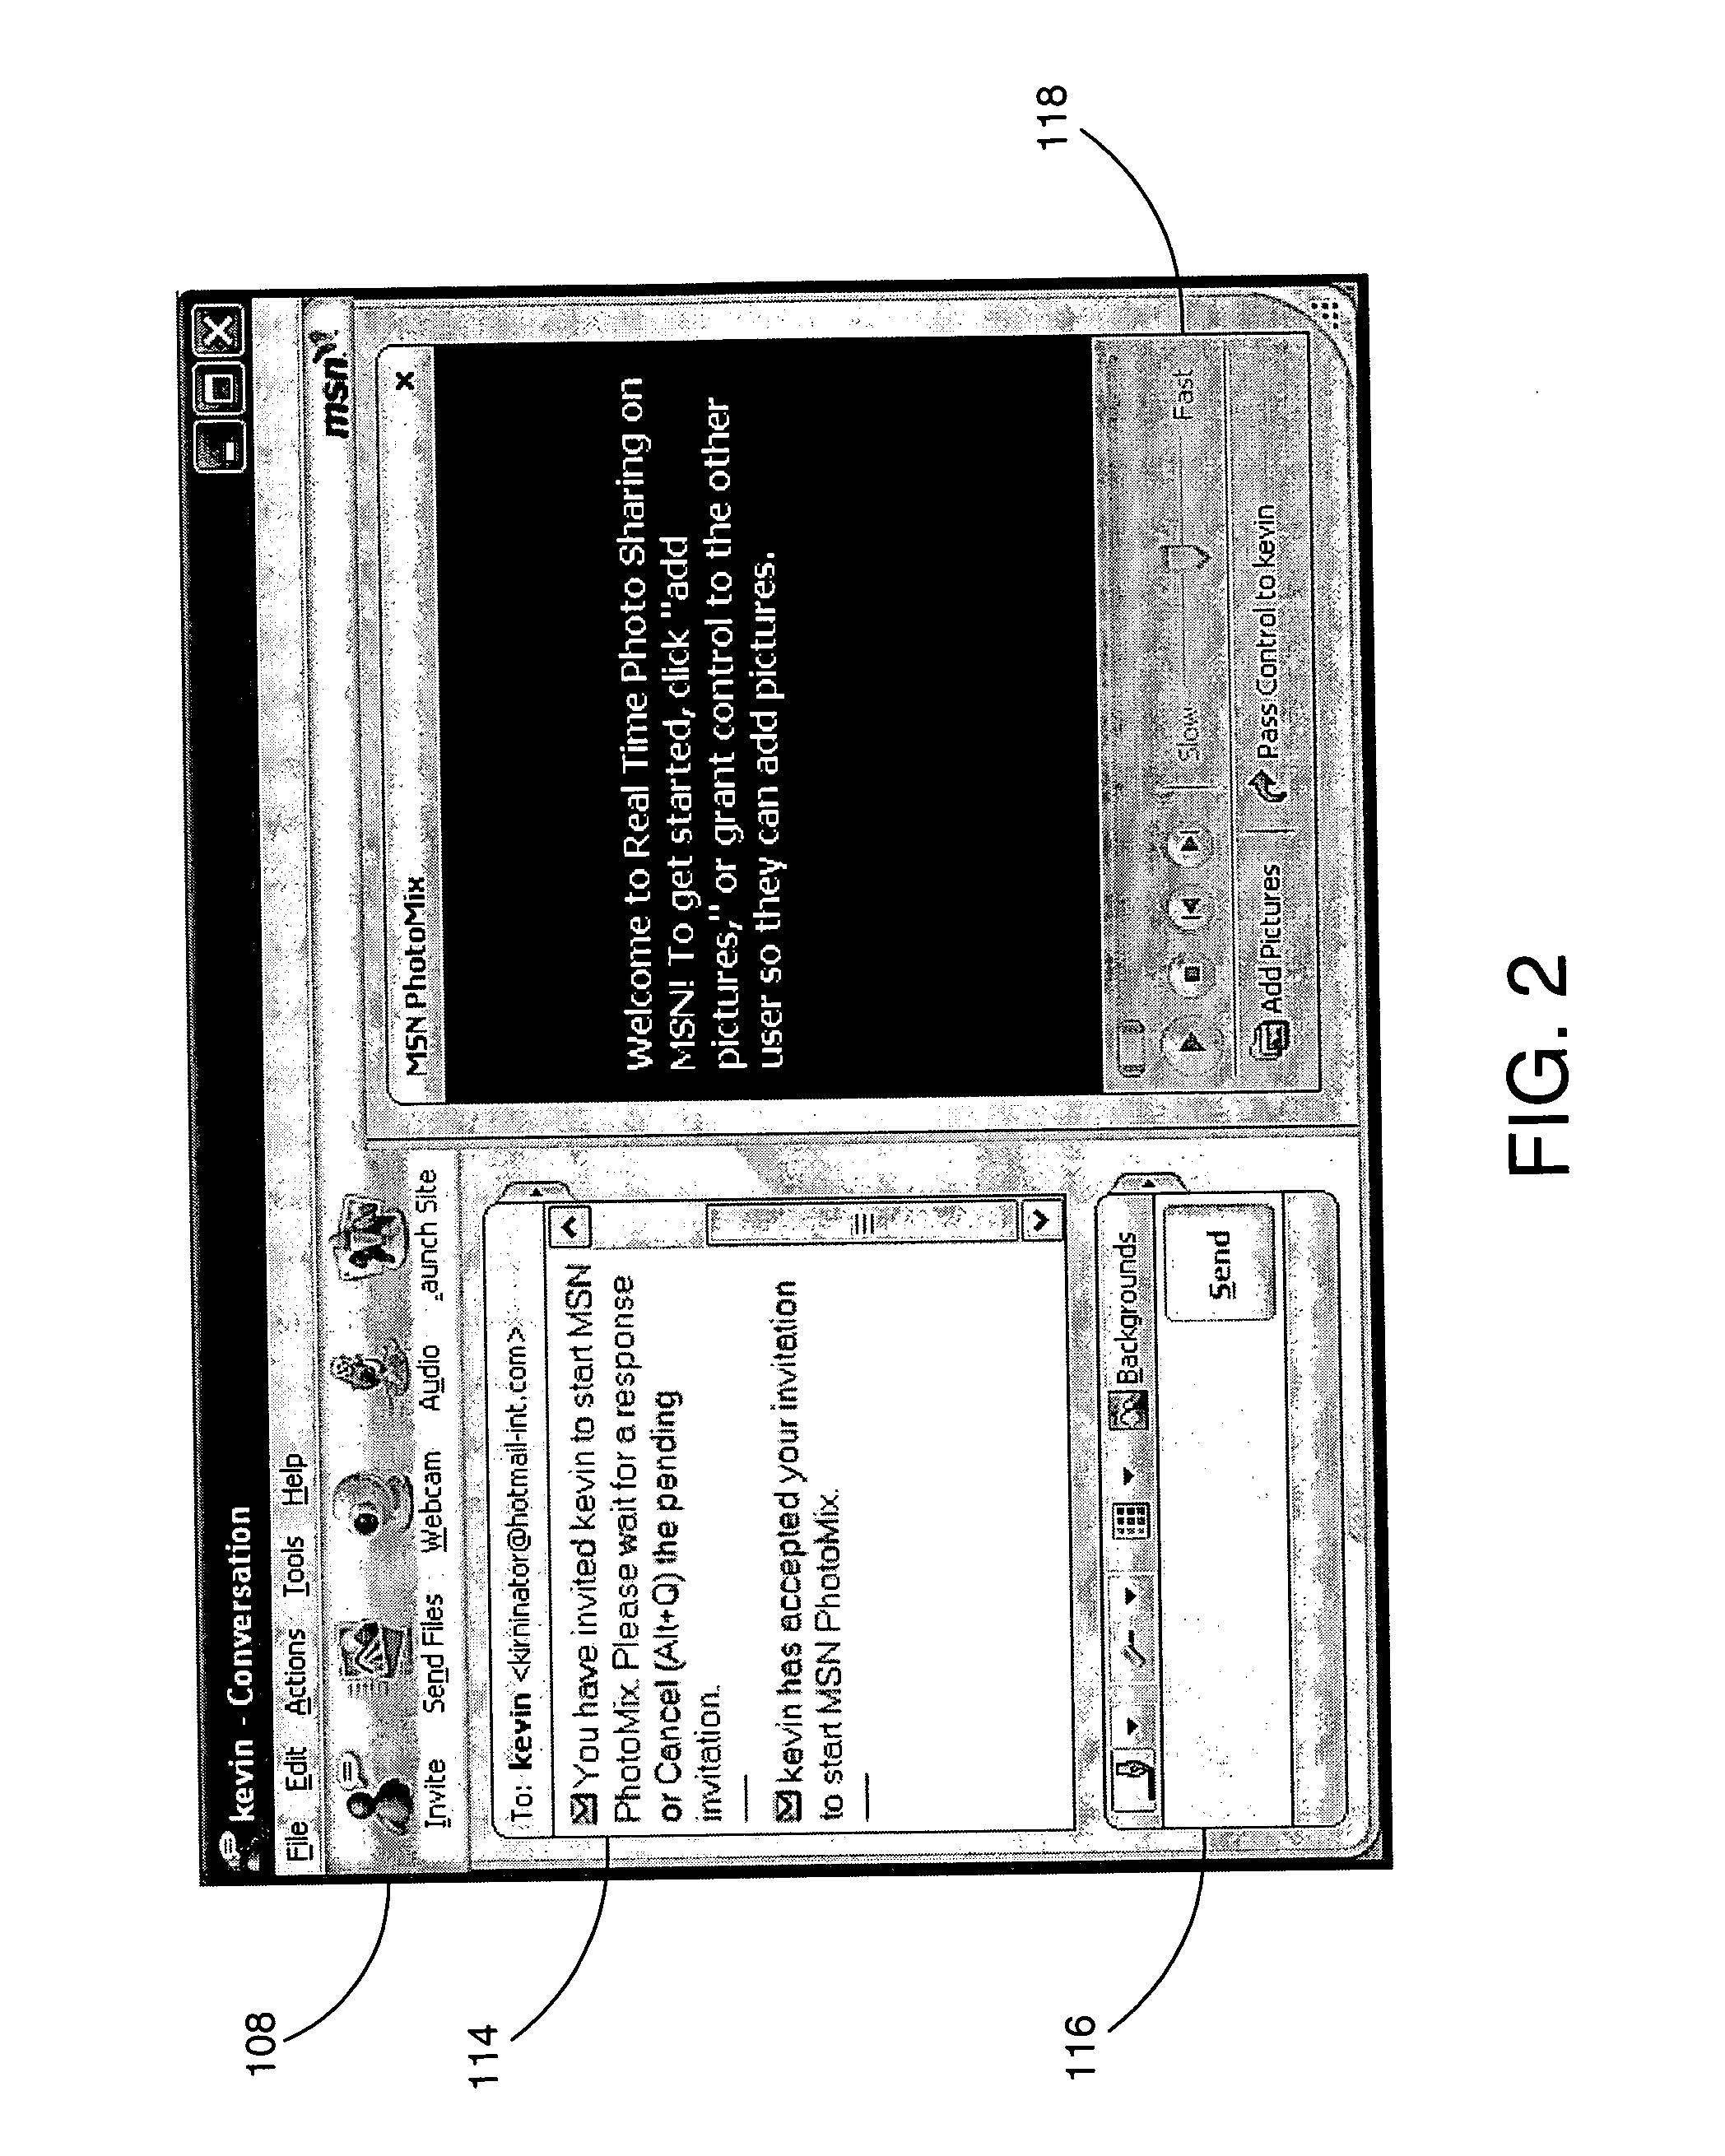 System and method for realtime messaging having image sharing feature